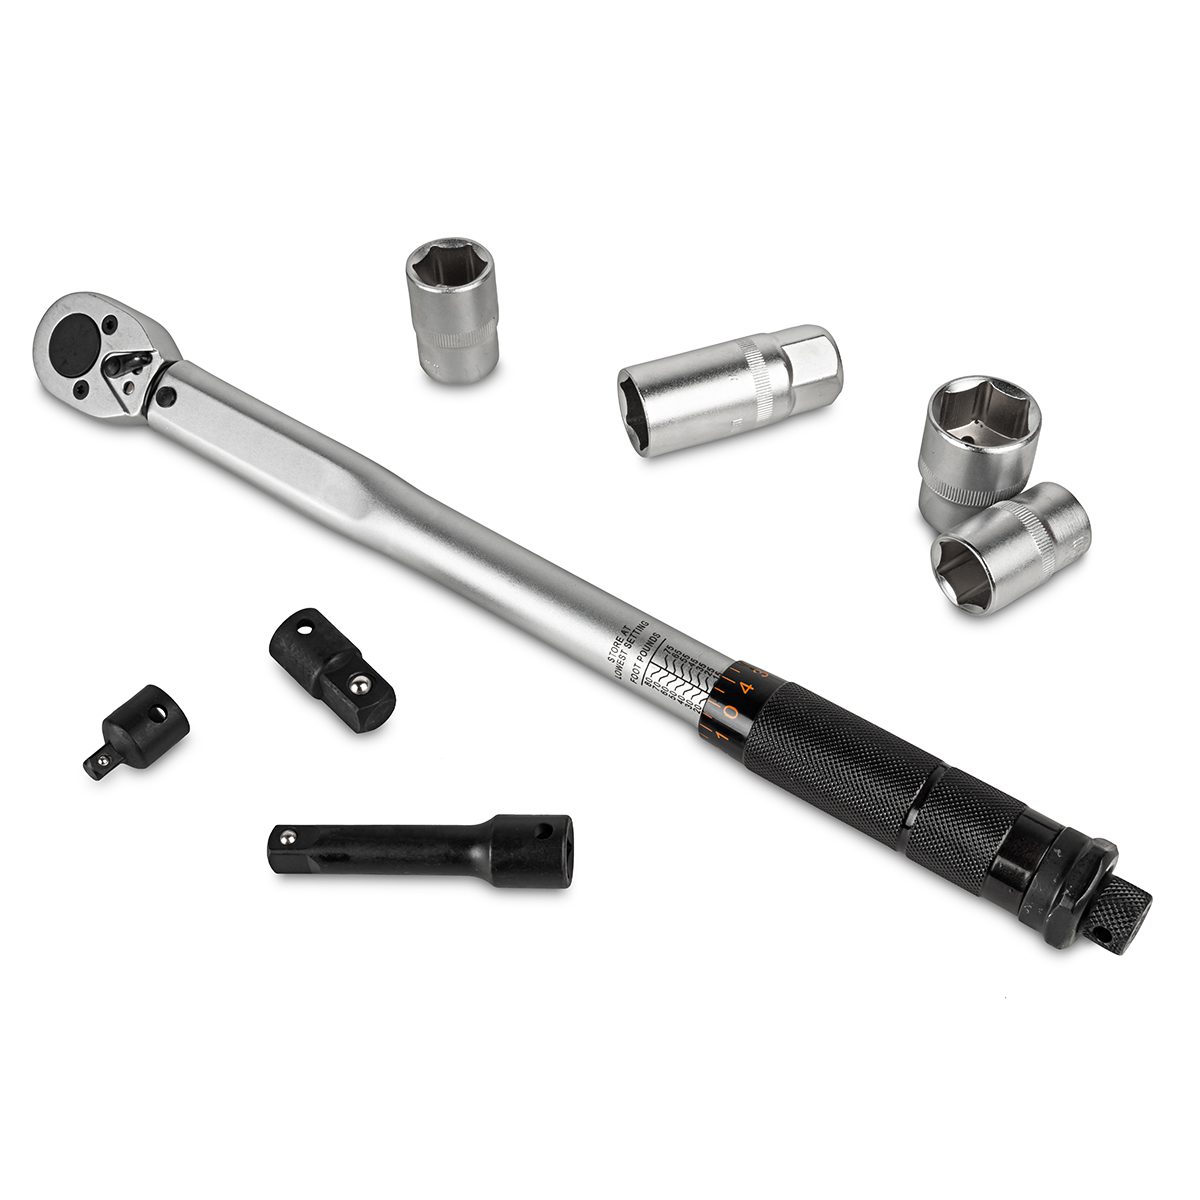 christmas-gift-ideas-for-car-and-diy-lover/images/Torque-Wrench-partsavatar-canada.jpeg